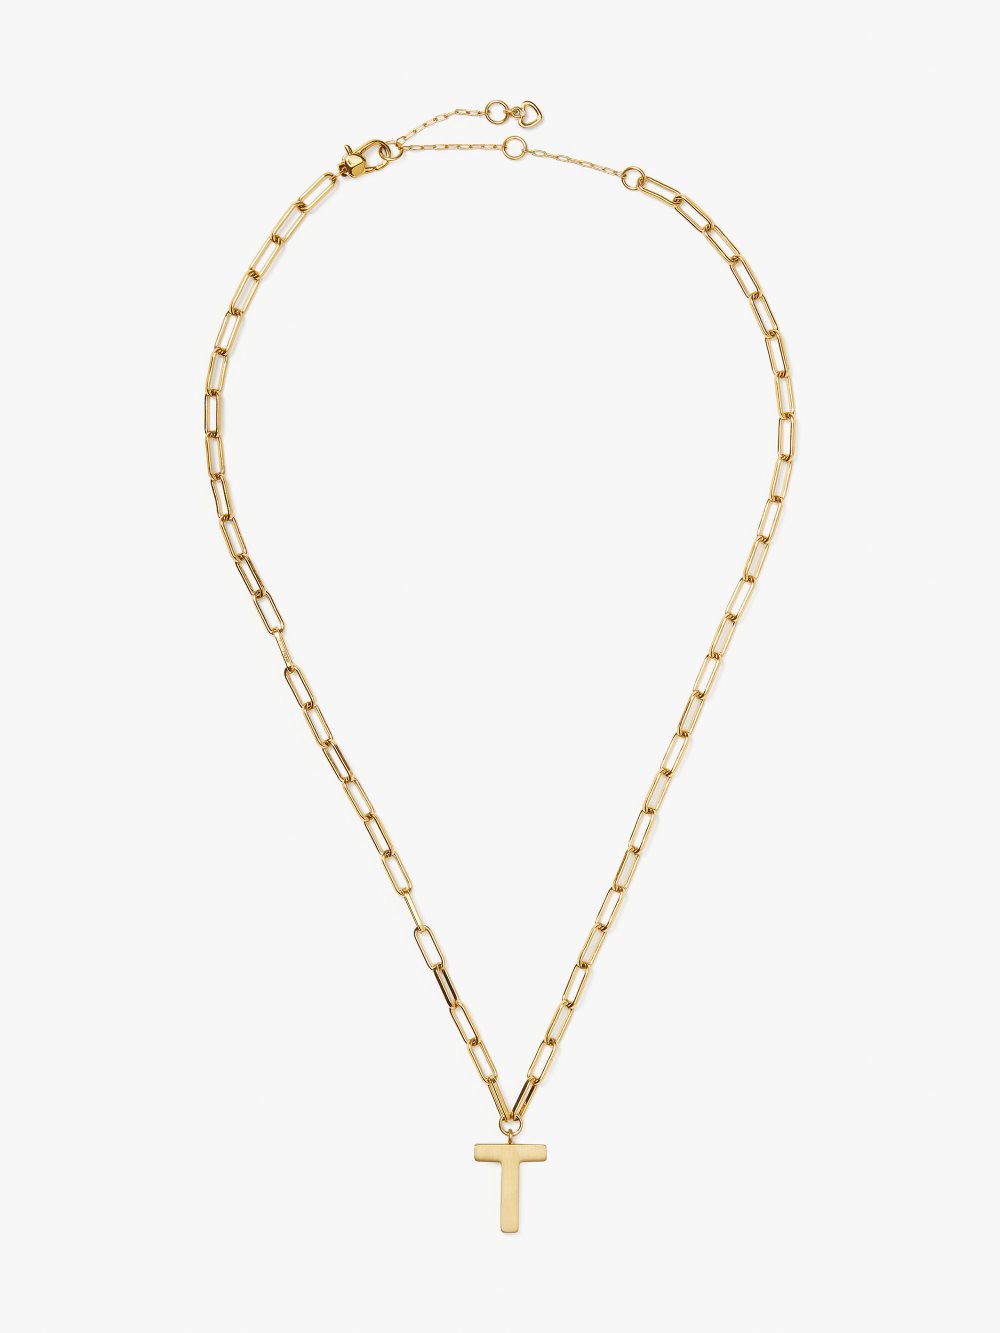 Women's gold. t initial this pendant | Kate Spade